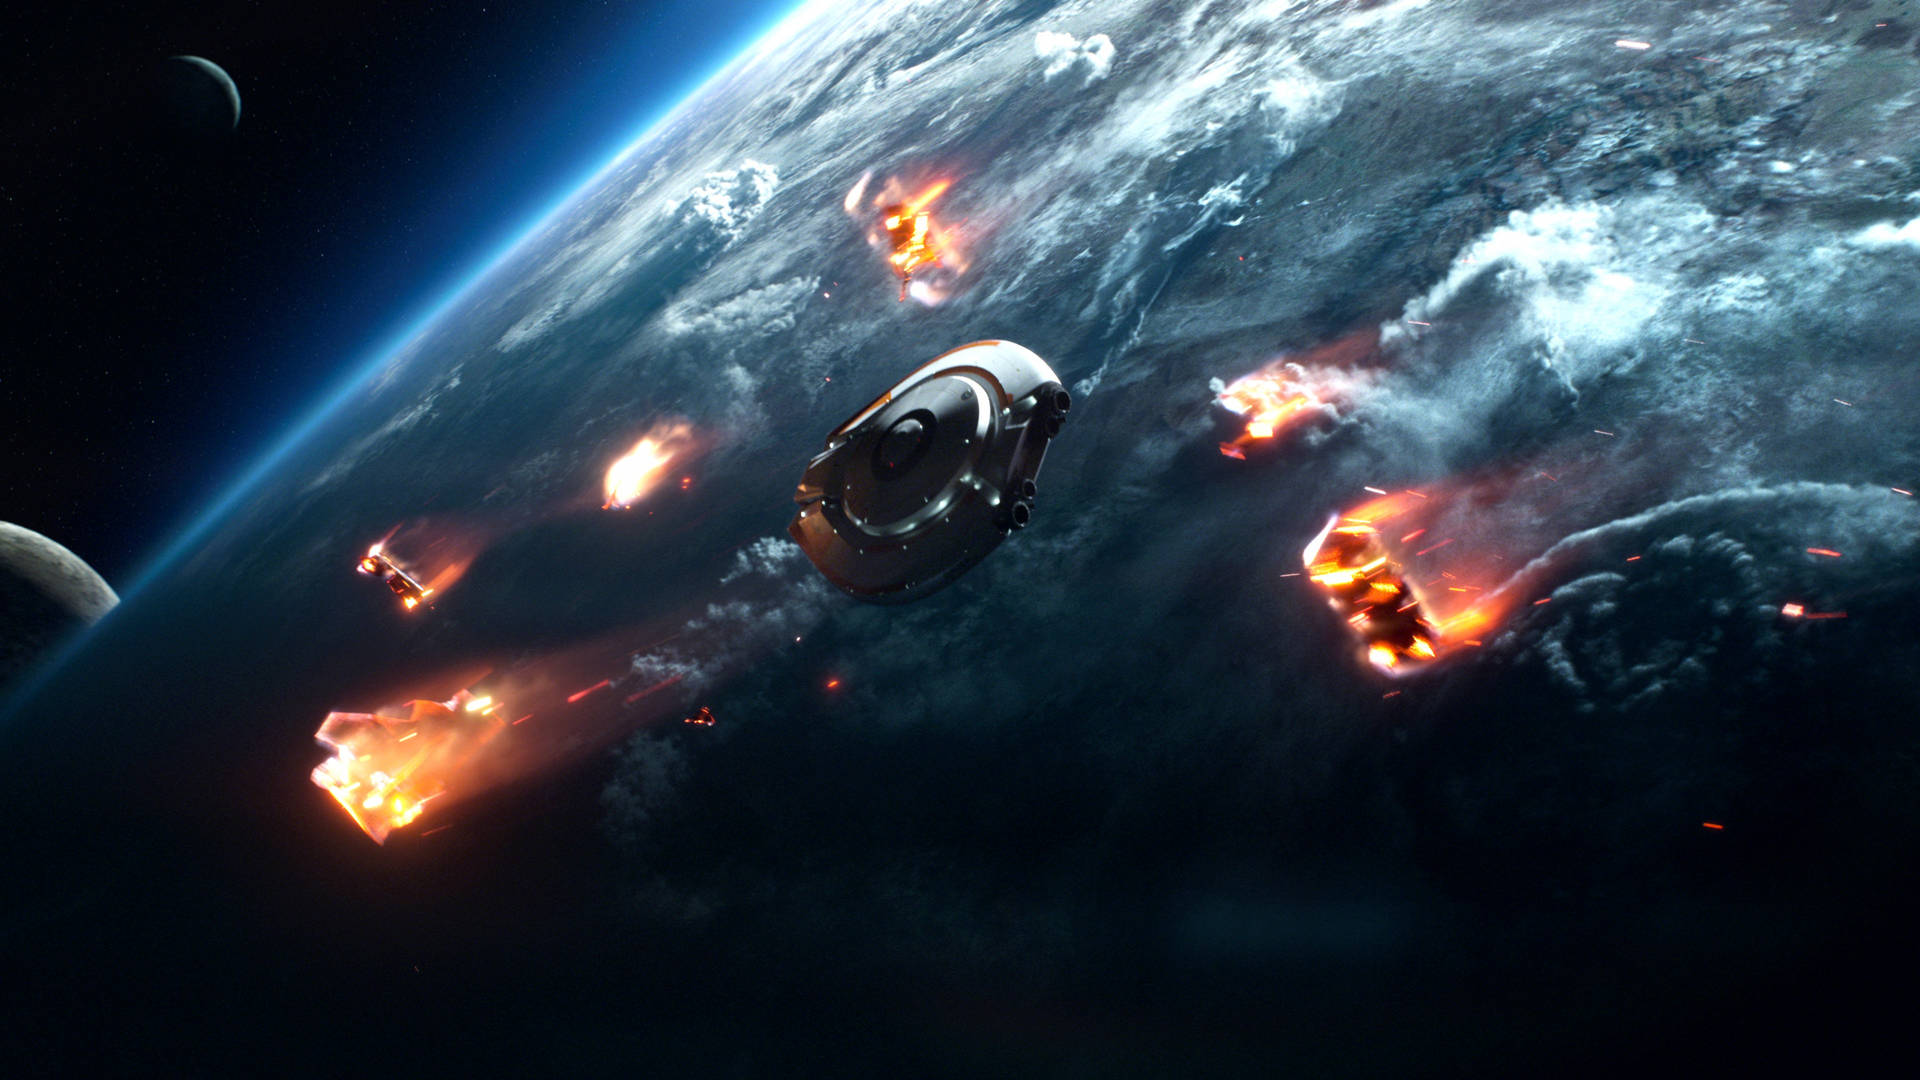 Lost In Space Asteroid Explosion Background